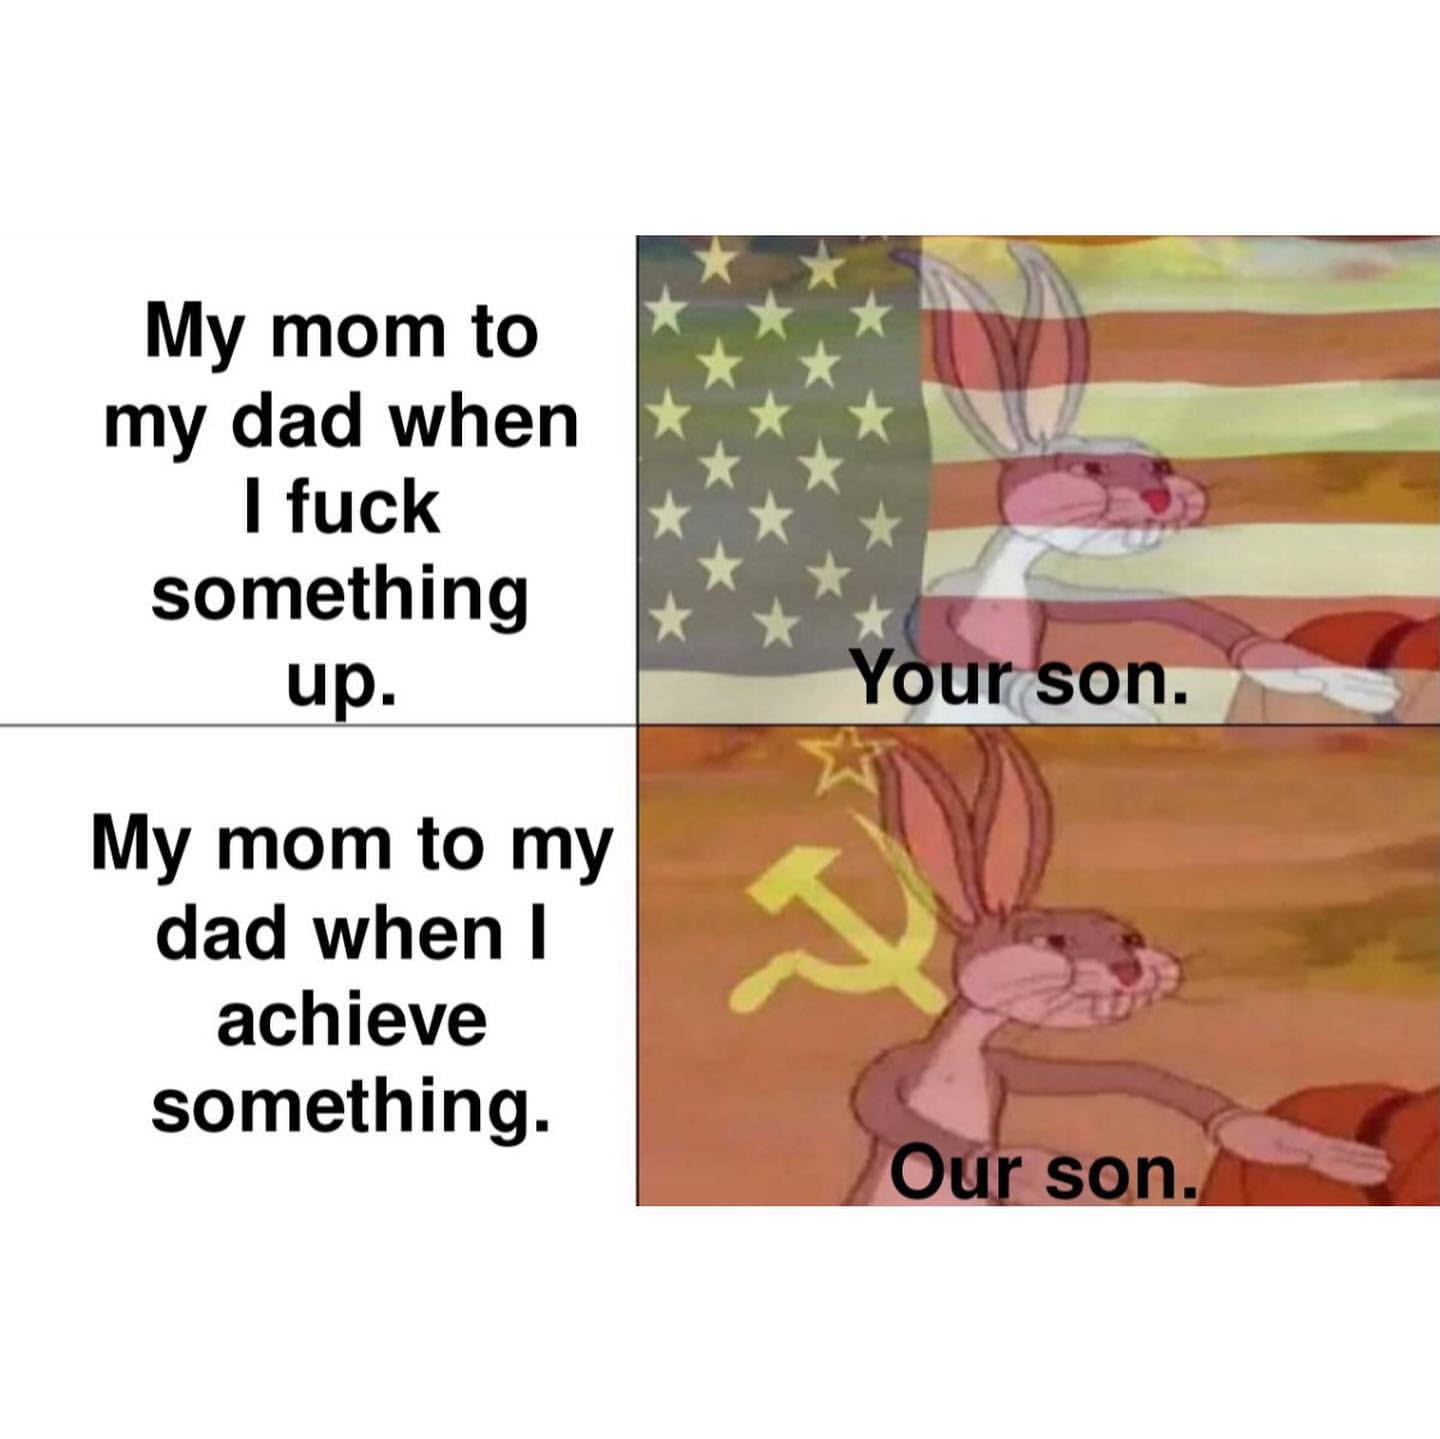 My mom to my dad when I fuck something up: Your son. My mom to my dad when I achieve something: Our son.